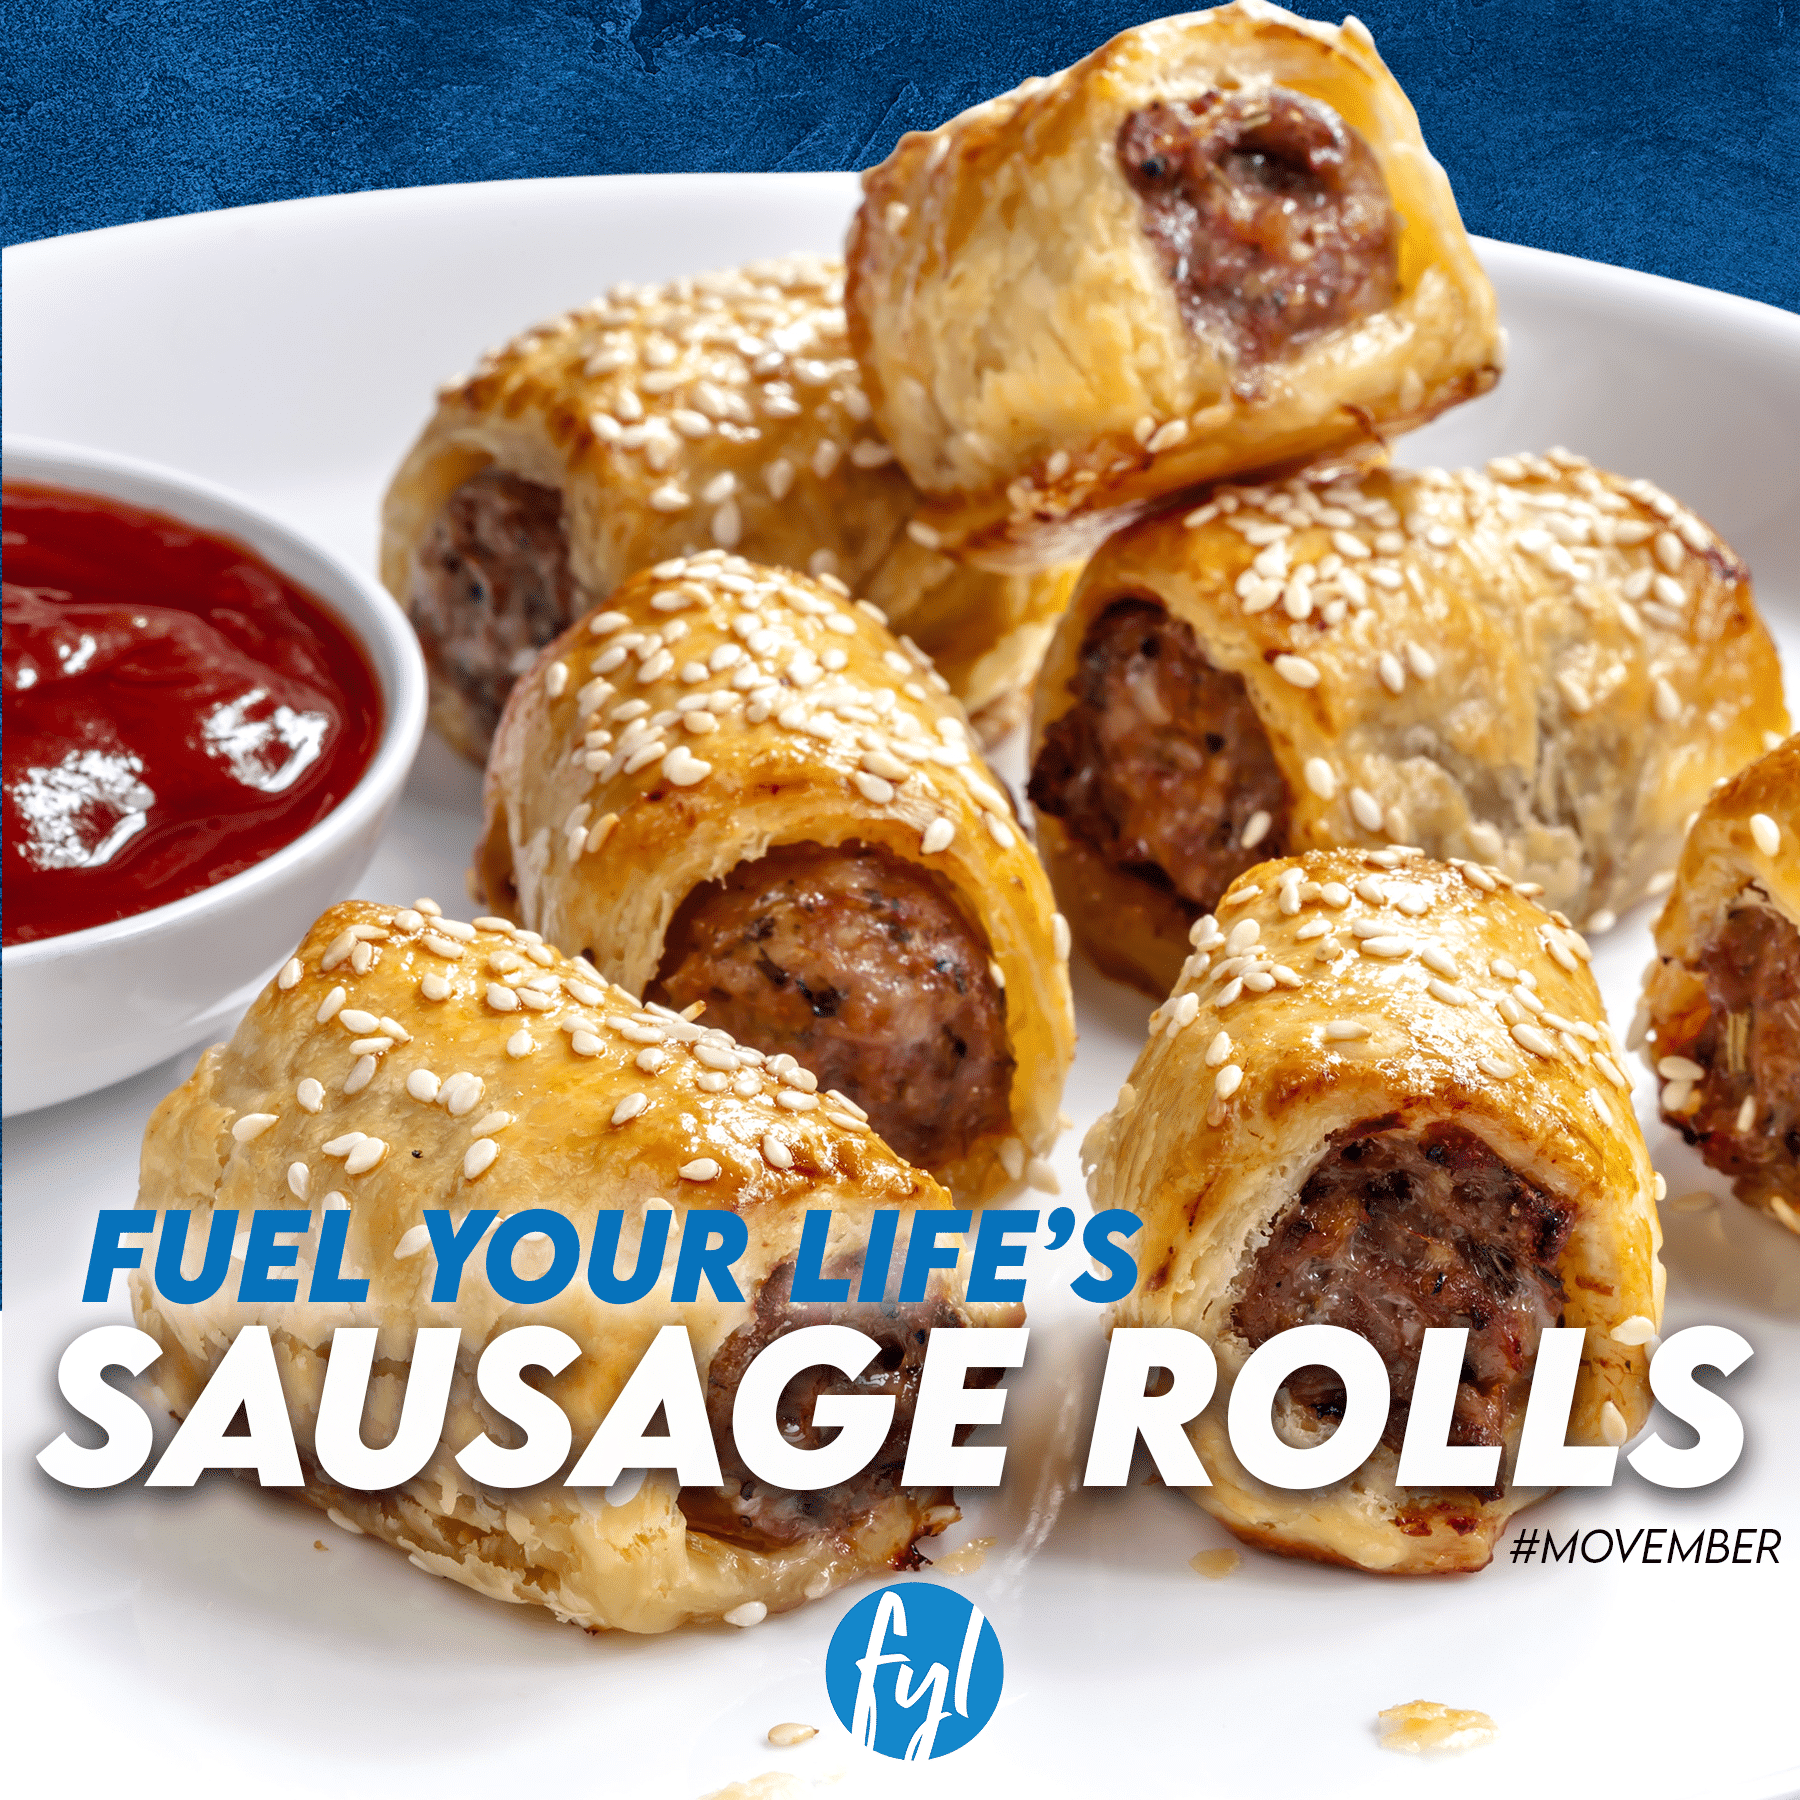 Recipe: Fuel Your Life’s Sausage Rolls #Movember